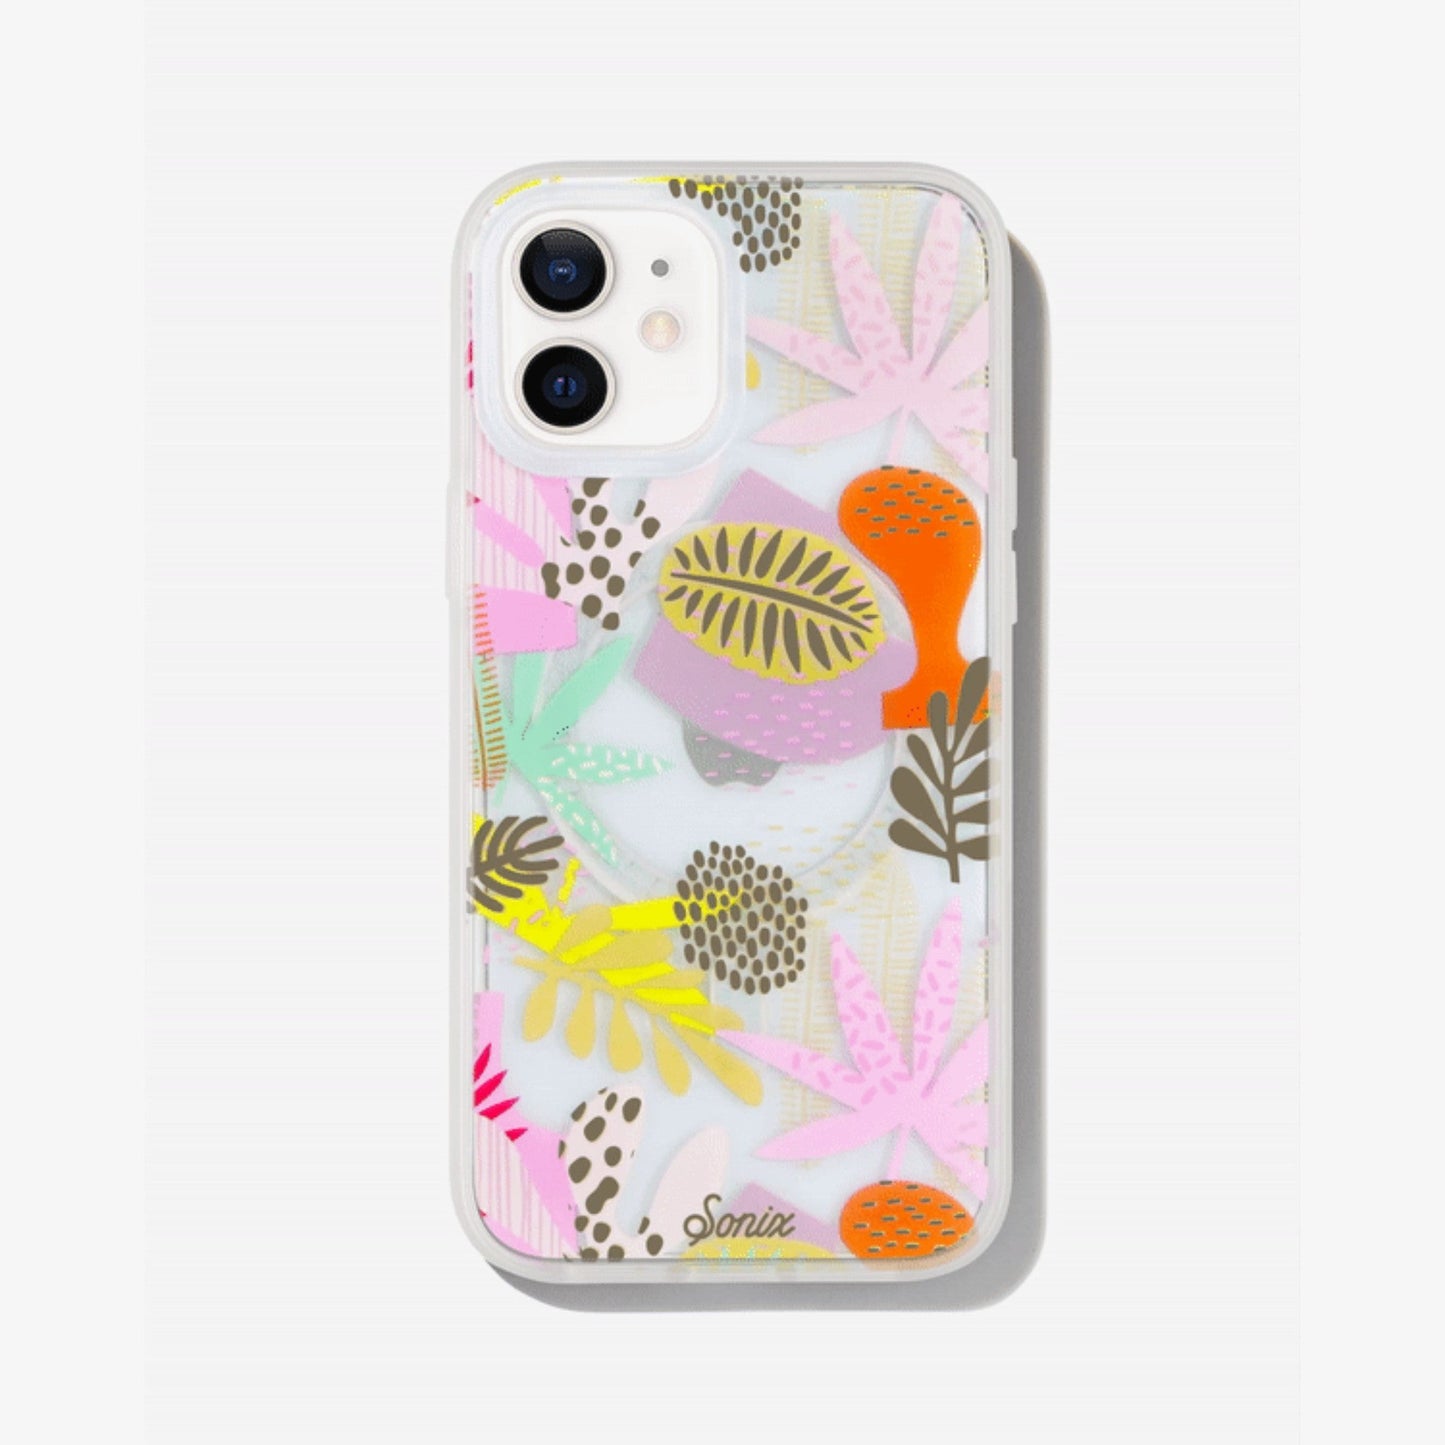 a collection of earthy shapes and forms, like plants and flowers to create a composition of playful abstract art with gold foil details shown on an iphone 12